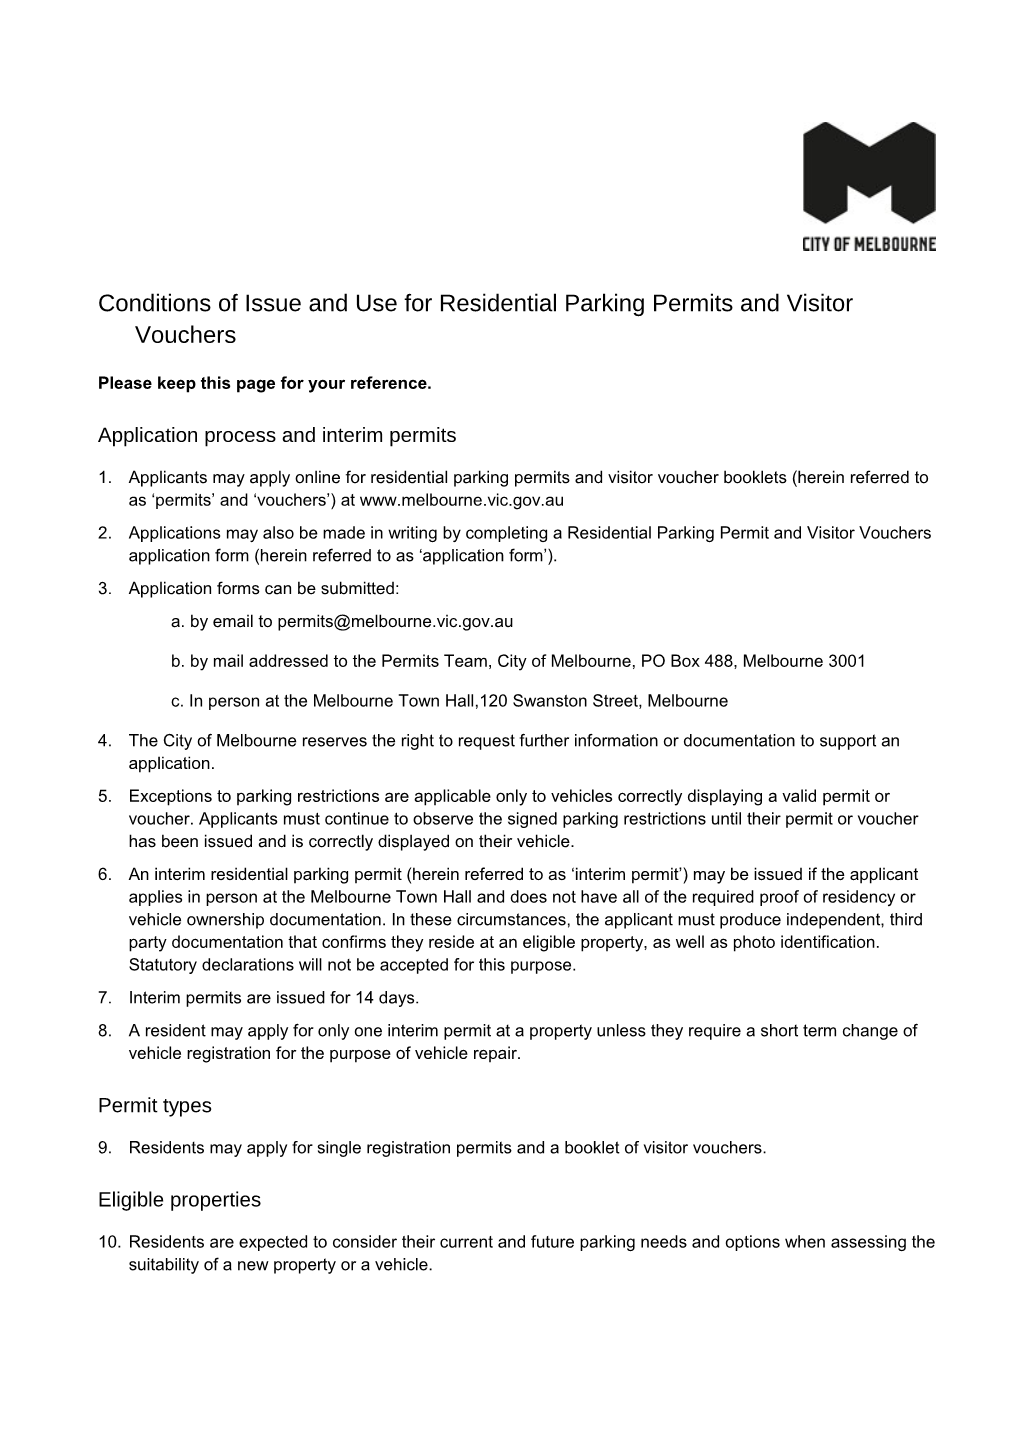 Conditions of Issue and Use for Residential Parking Permits and Visitor Vouchers: Parkville